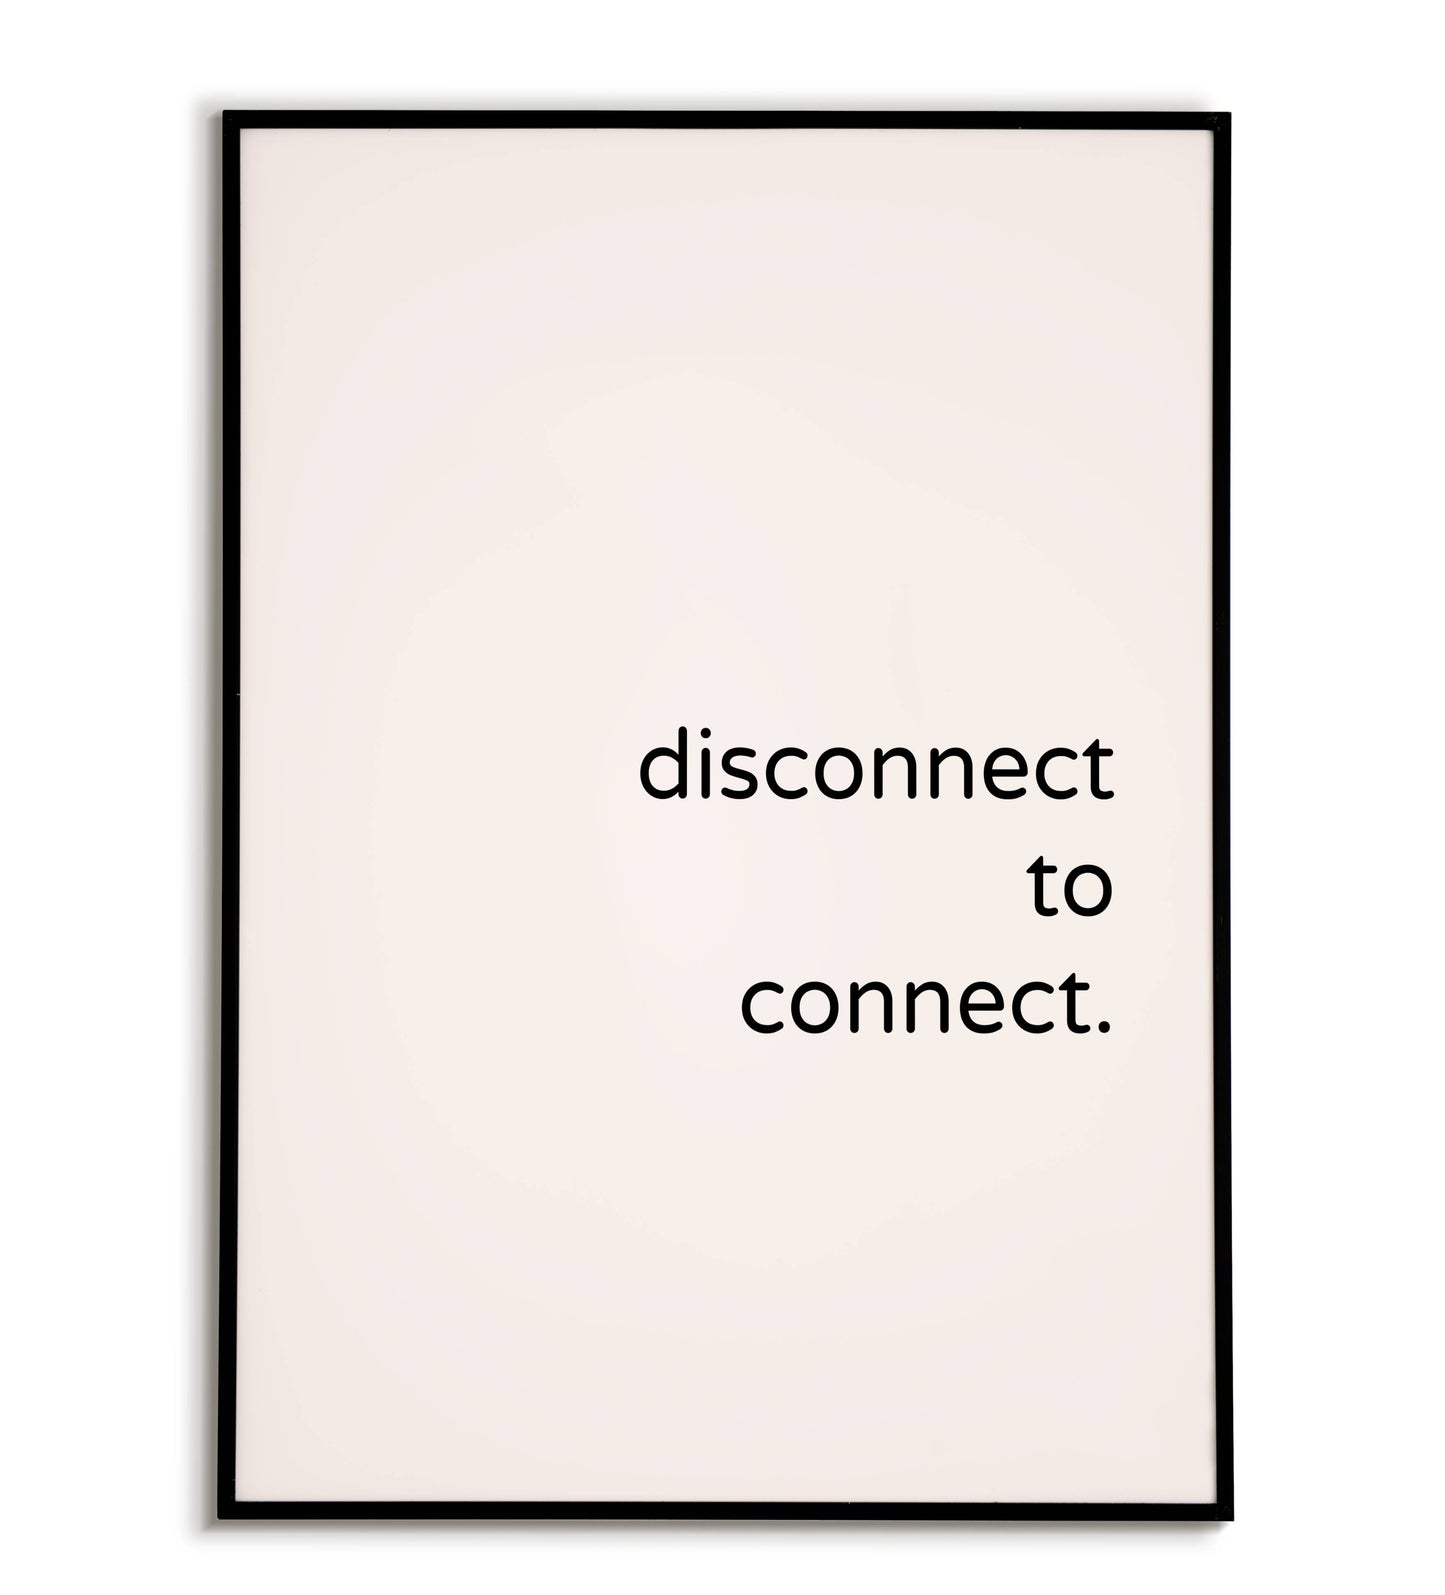 Inspirational "Disconnect to connect" printable poster, encourage digital detox and meaningful interactions.	